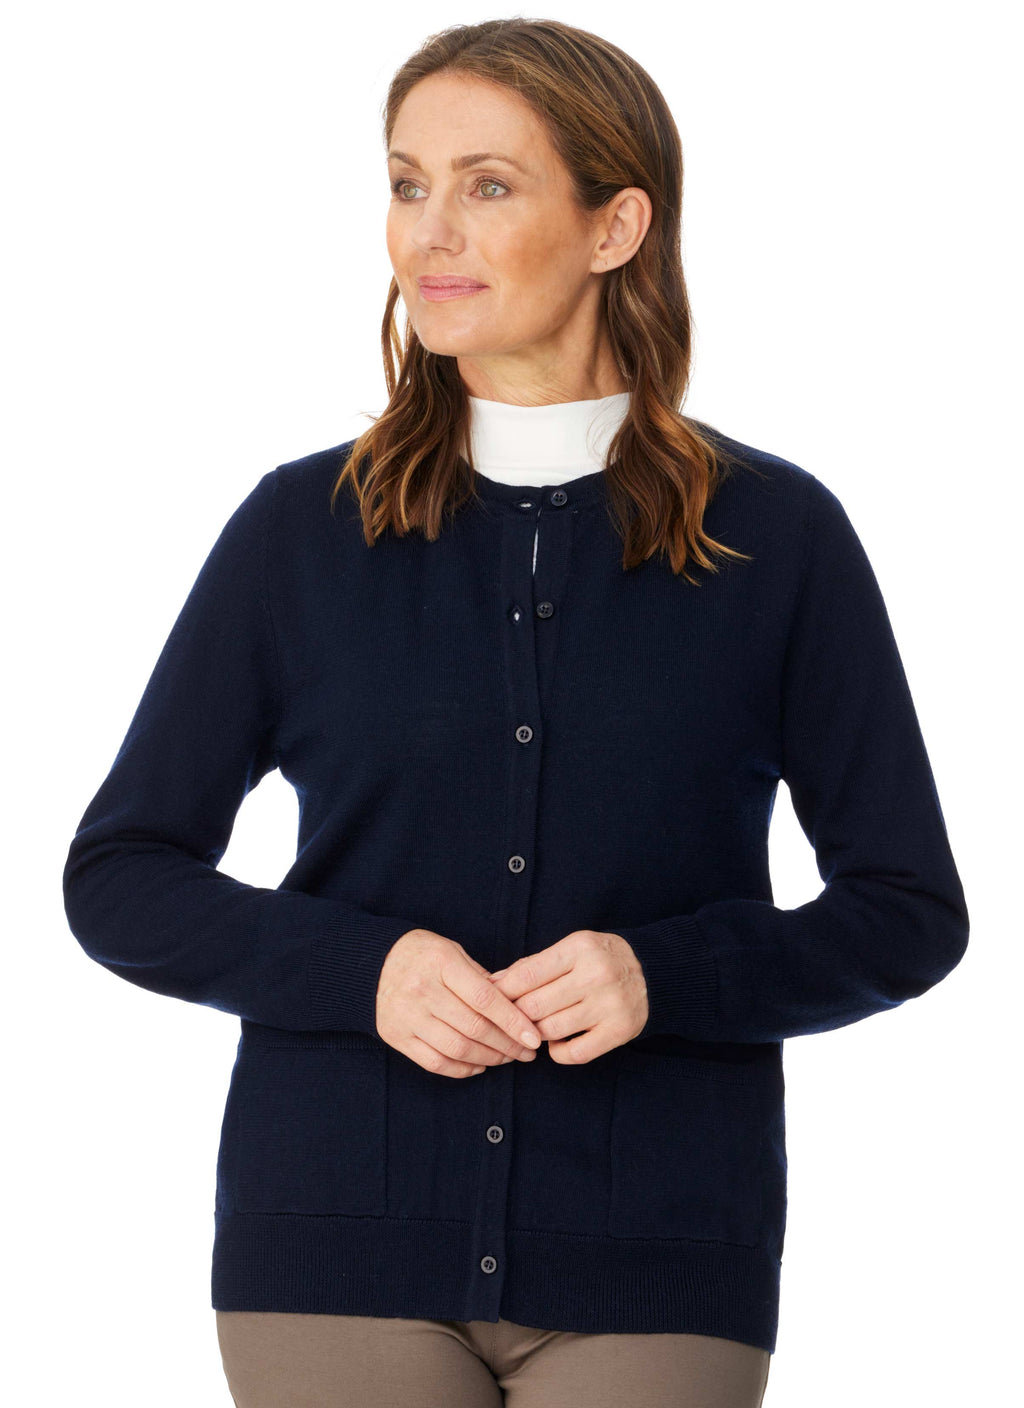 LEVENDALE CLASSIC CARDIGAN WITH POCKETS - NAVY